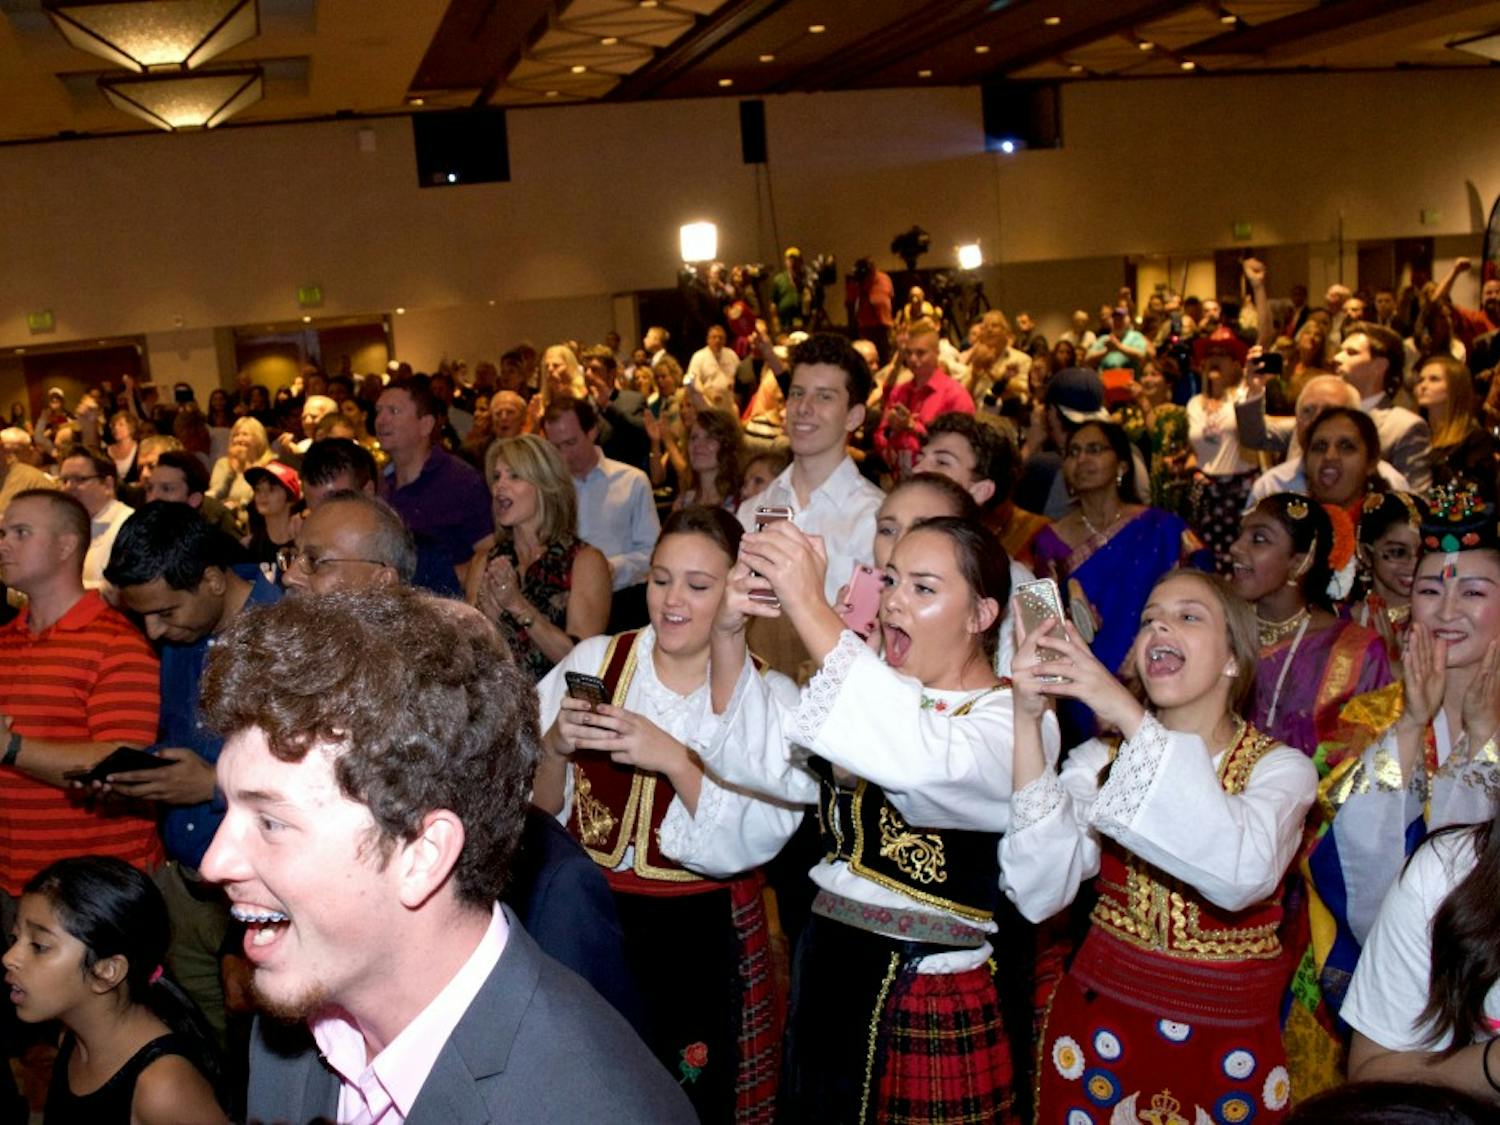 Supporters react during a viewing party for the Arizona State GOP at the Hyatt Regency Hotel on Tuesday, Nov. 9, 2016.